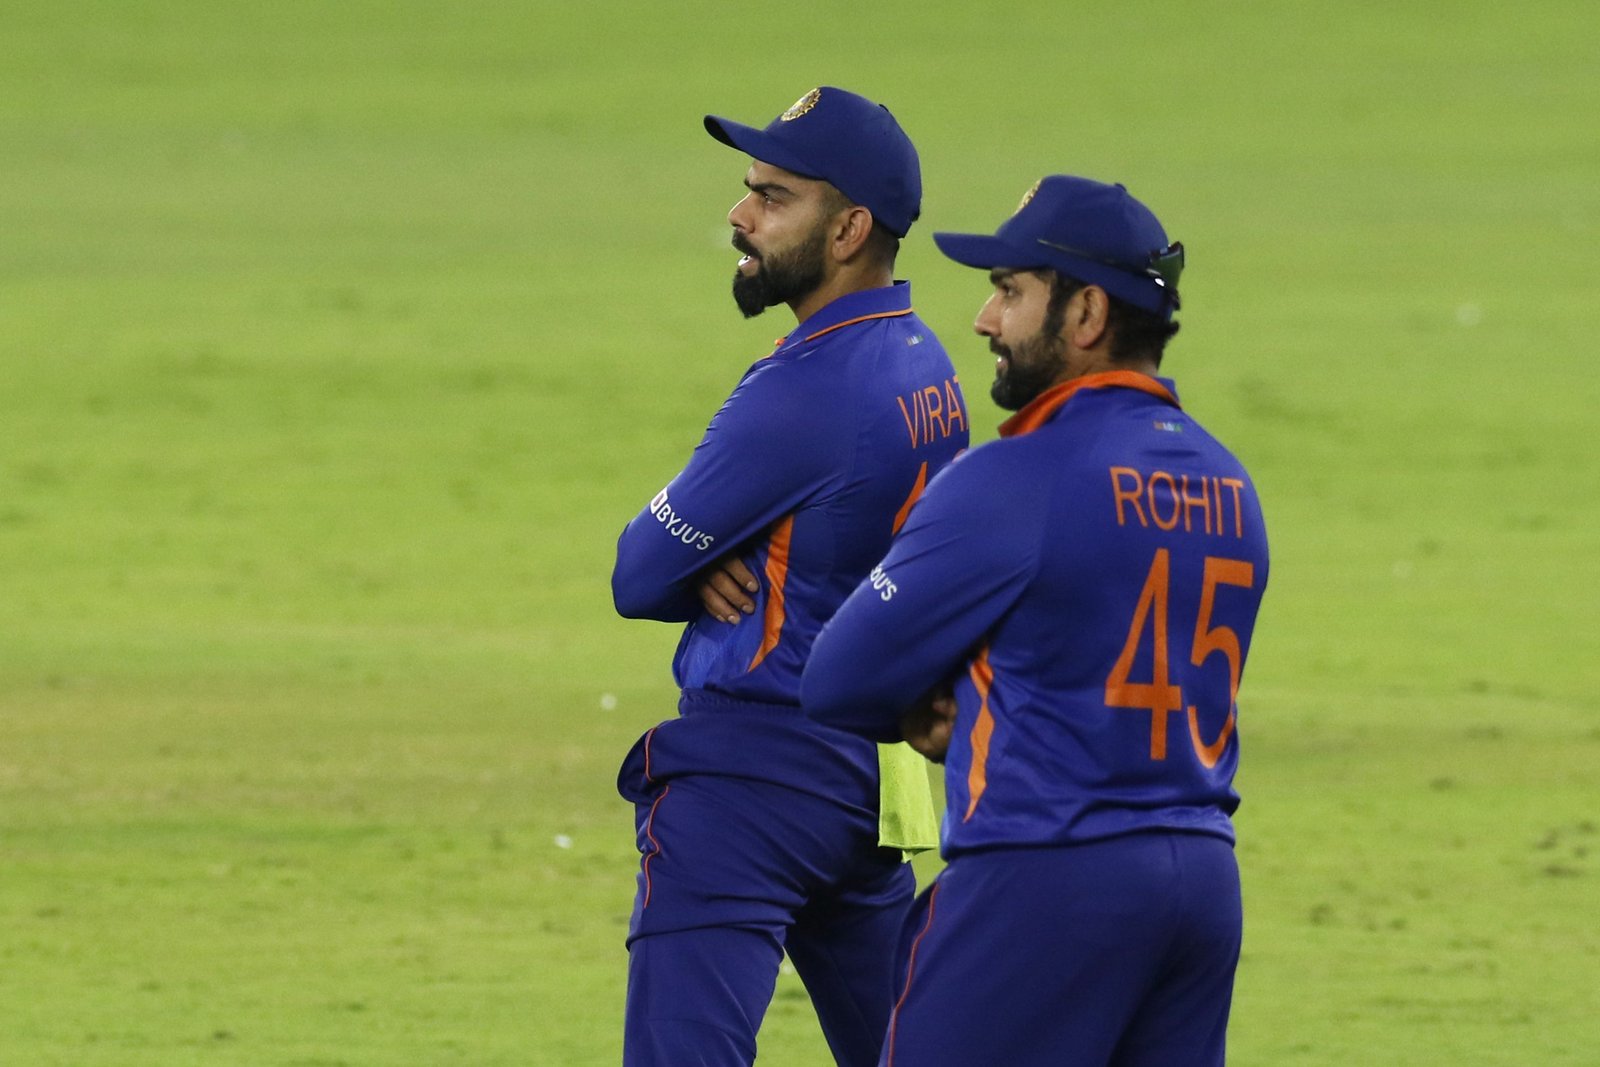 Rohit Sharma backs Virat Kohli to rediscover form as India take on Windies in T20Is.Pic/BCCI